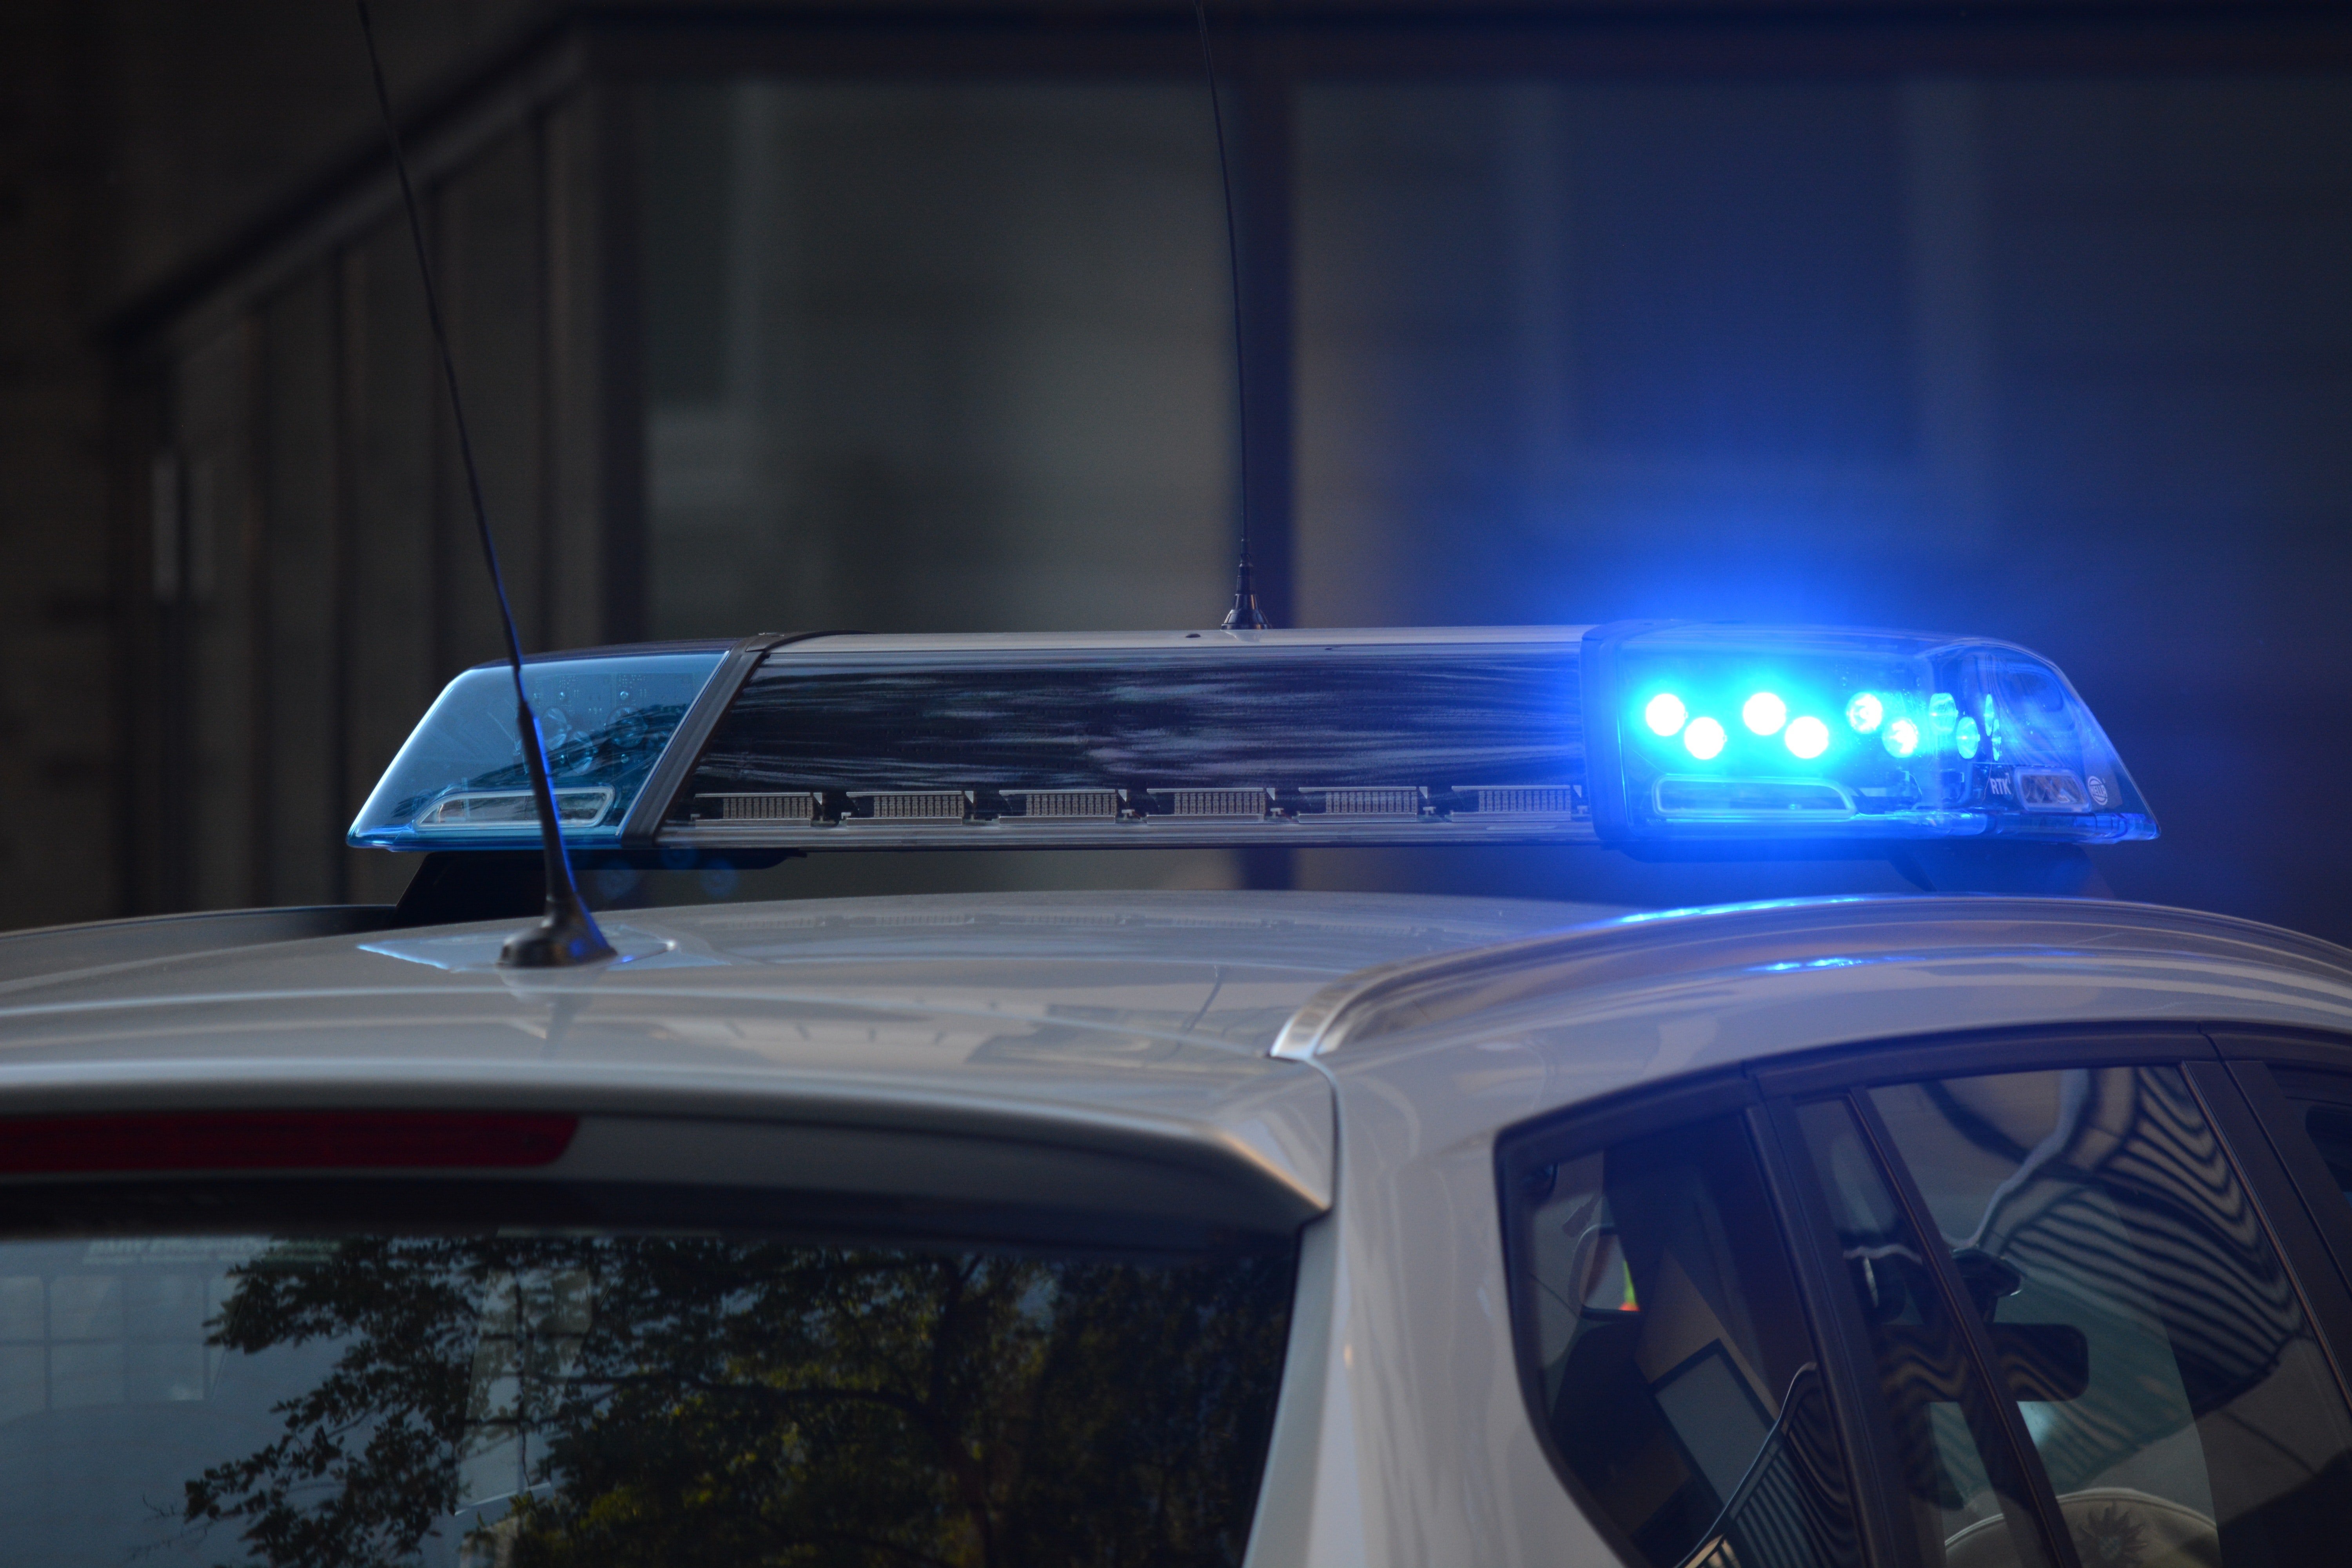 Pictured - An image of a police vehicle blue light | Source: Pexels 